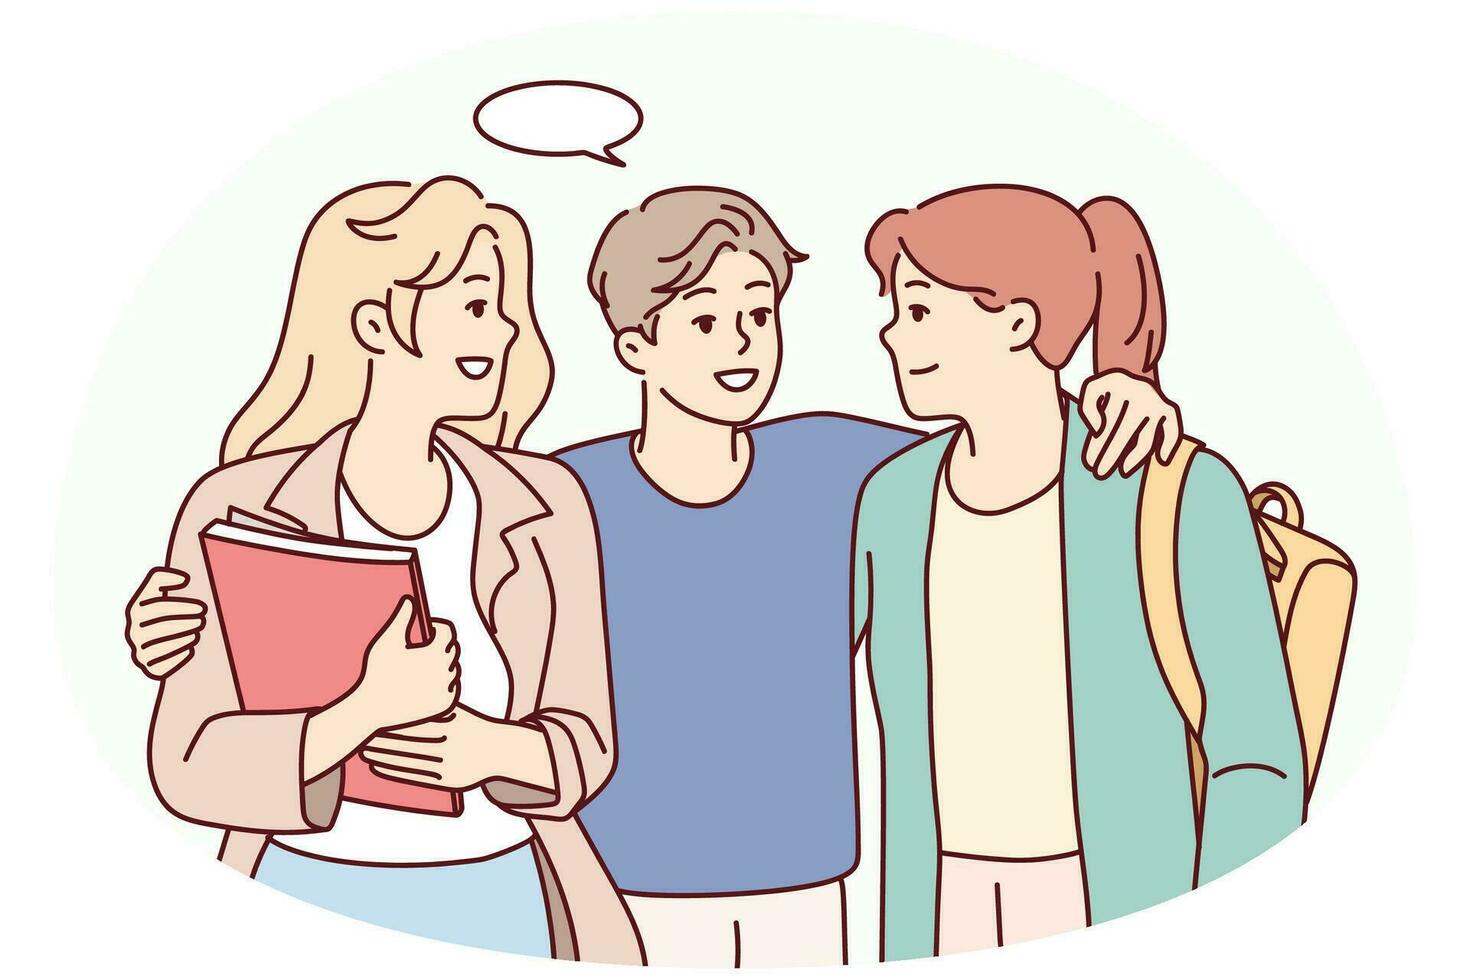 Smiling young guy flirting with female mates. Male hug talk with millennial girls in college or university. Vector illustration.